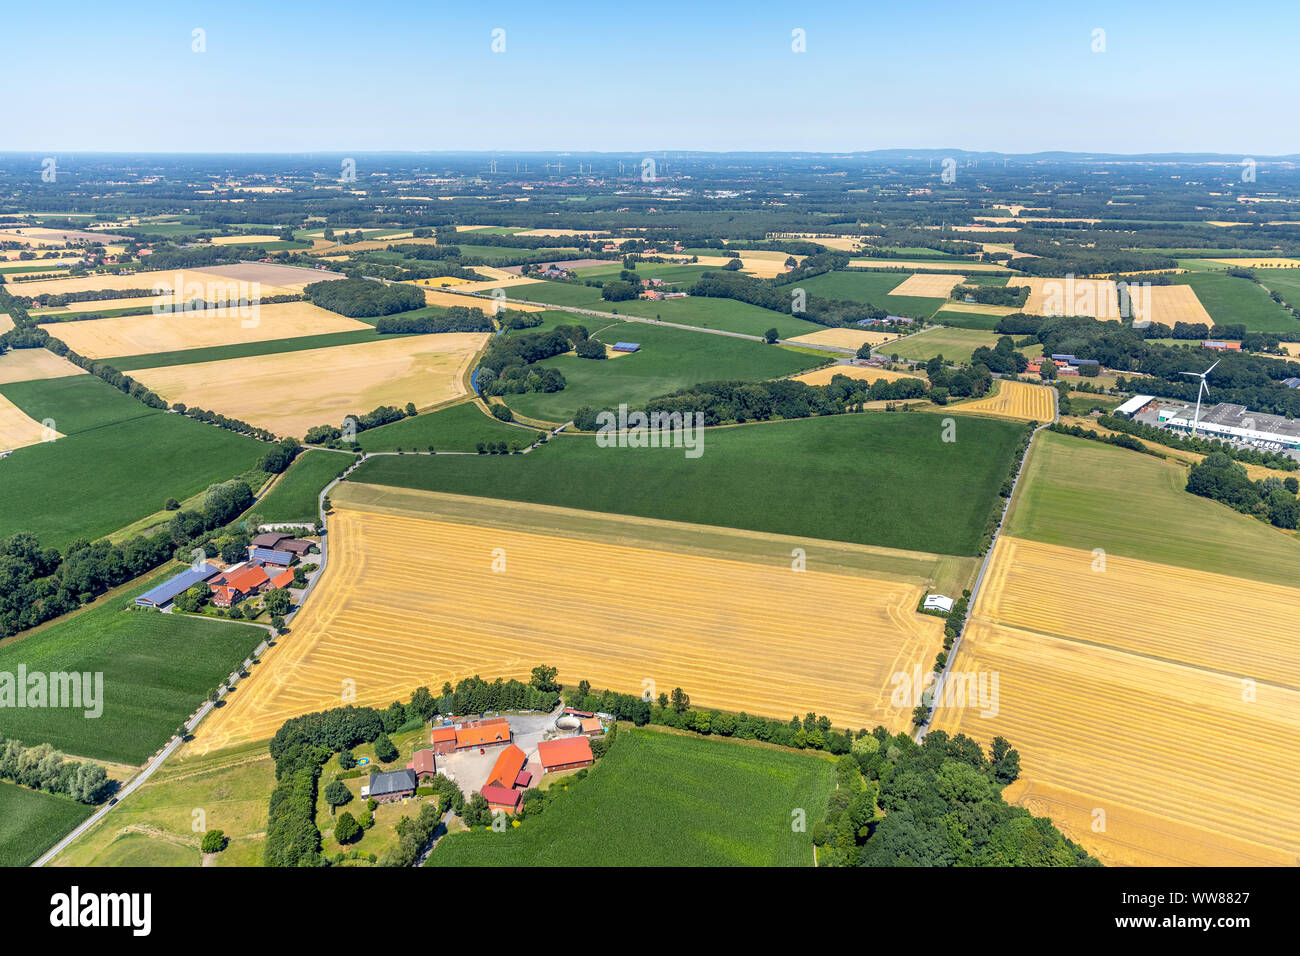 Aviation school active zone - Paragliding school in MÃ¼nsterland, private airfield Beelen, agriculture, fields, meadows, forests west of Beelen, Beelen, district Warendorf, MÃ¼nsterland, North Rhine-Westphalia, Germany Stock Photo